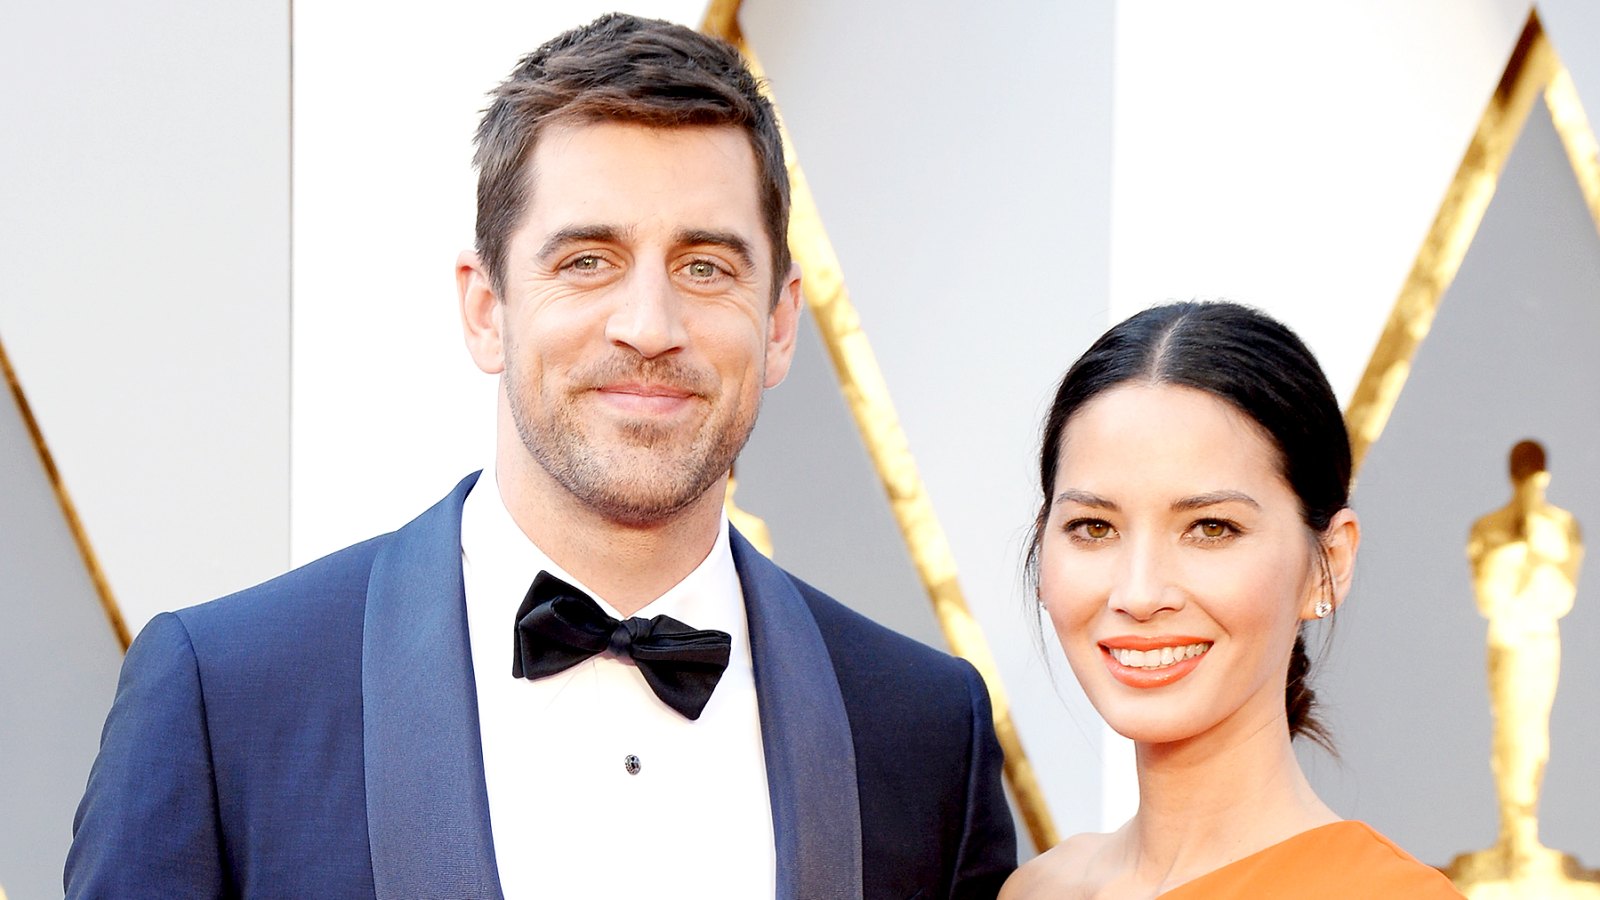 Olivia Munn and Aaron Rodgers attend the 88th Annual Academy Awards at Hollywood & Highland Center in Hollywood on February 28, 2016.